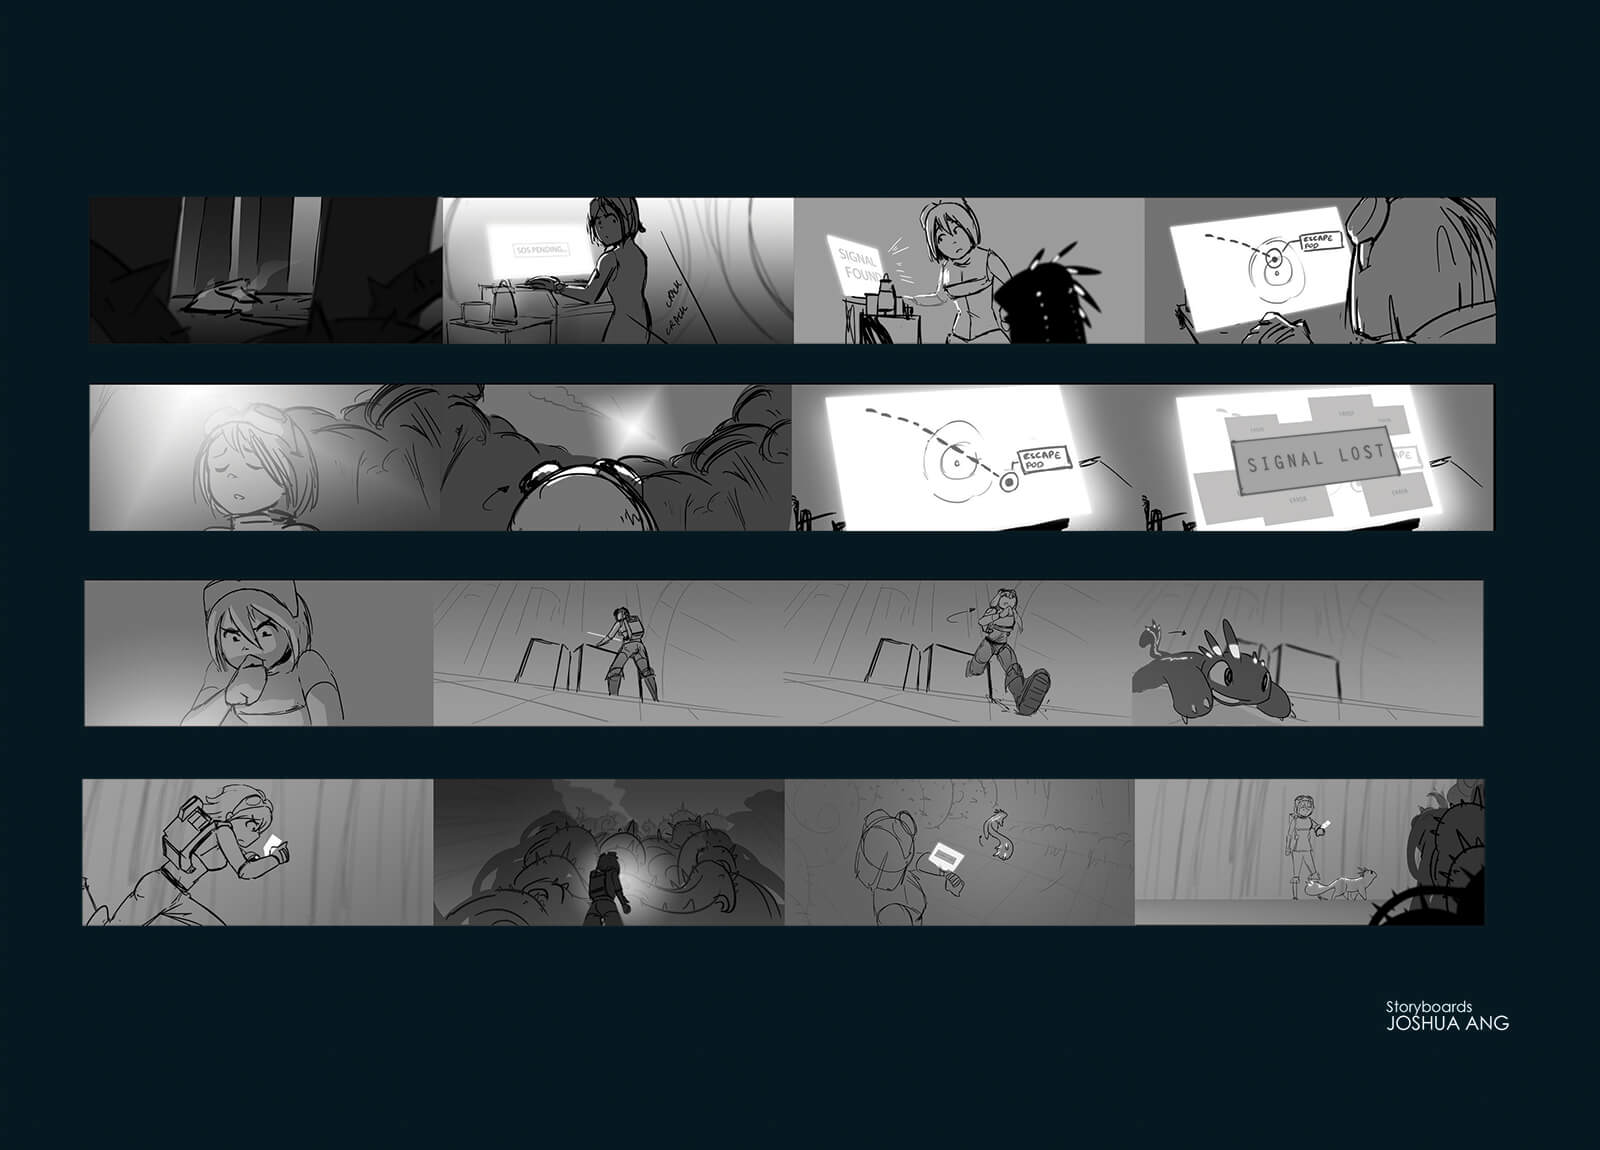 Grayscale storyboard drawings by Joshua Yang showing an action sequence from The Way Home.